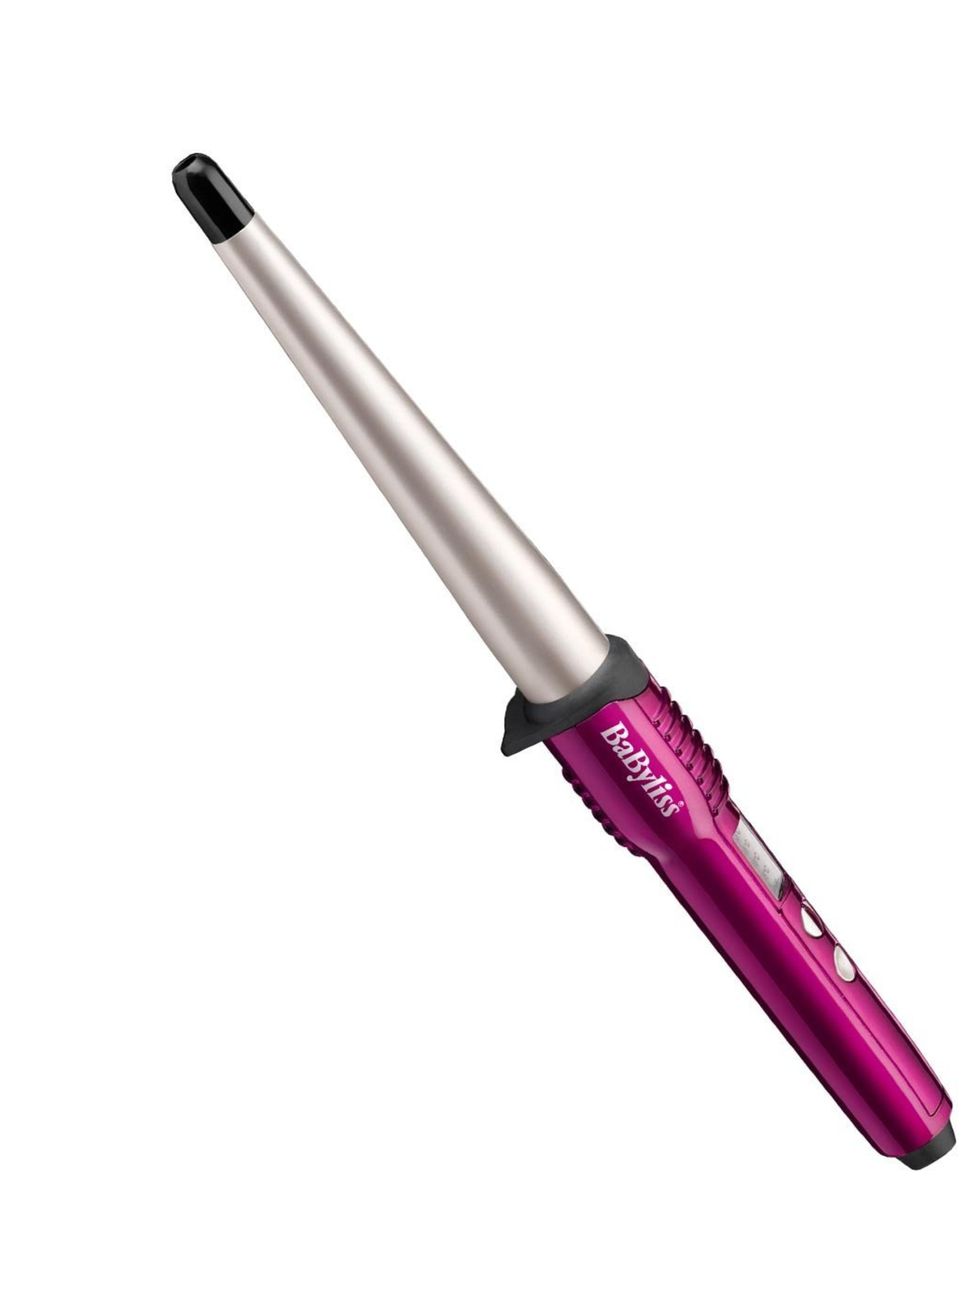 <p>Babyliss curling Wand, £25</p>